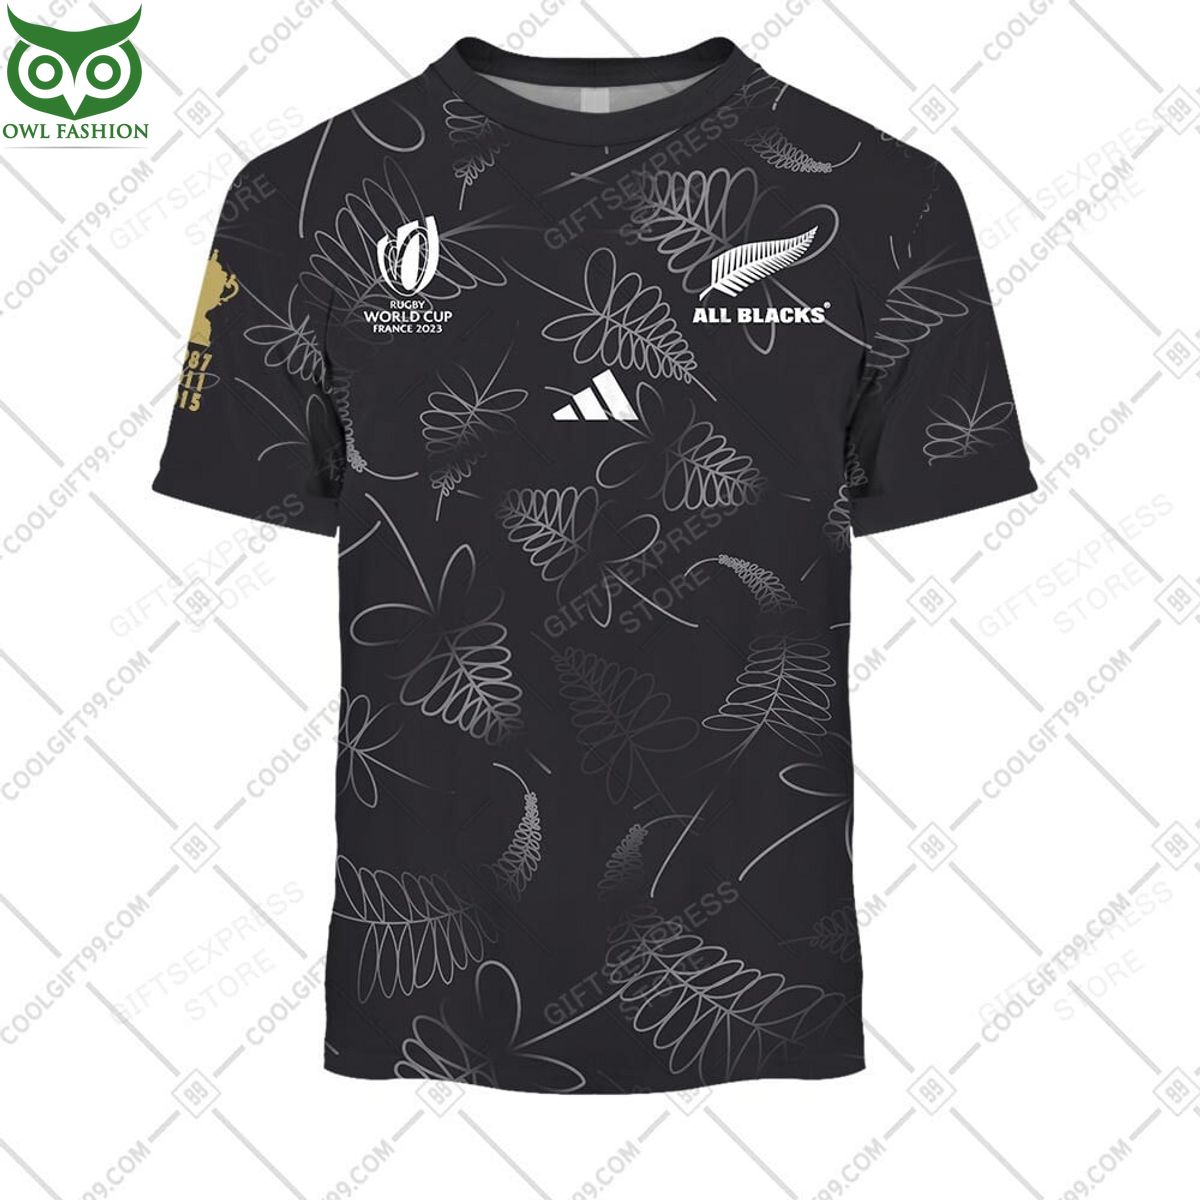 rugby world cup new zealand all black personalized 3d hoodie tshirt 5 3qbOx.jpg